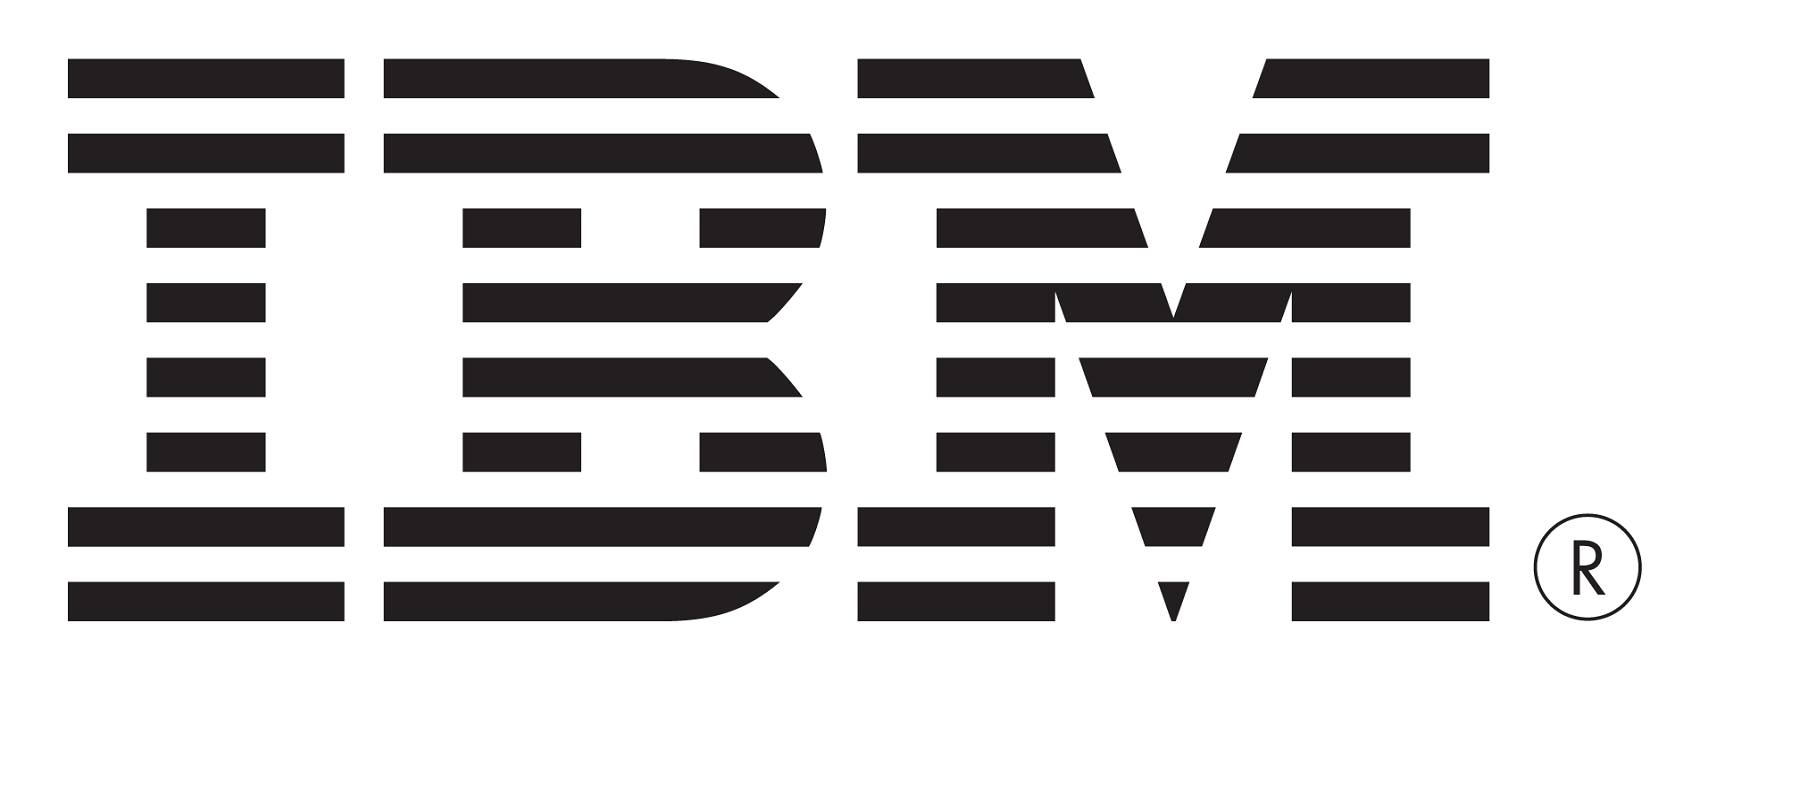 Deloitte and IBM collaborate to help organizations accelerate sustainability outcomes